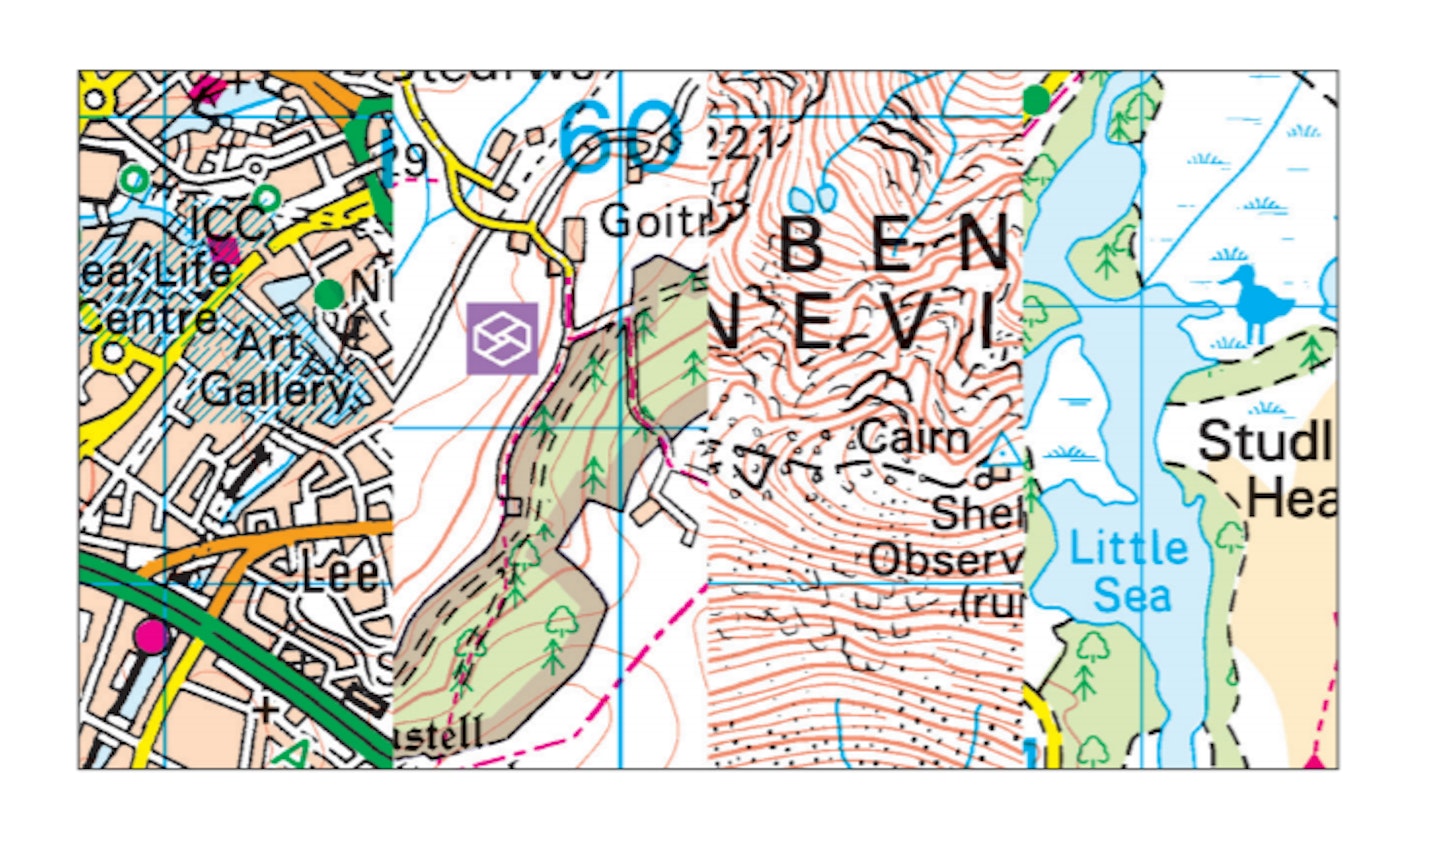 LEARN THE LEGEND - KNOW YOUR ORDNANCE SURVEY MAP SYMBOLS